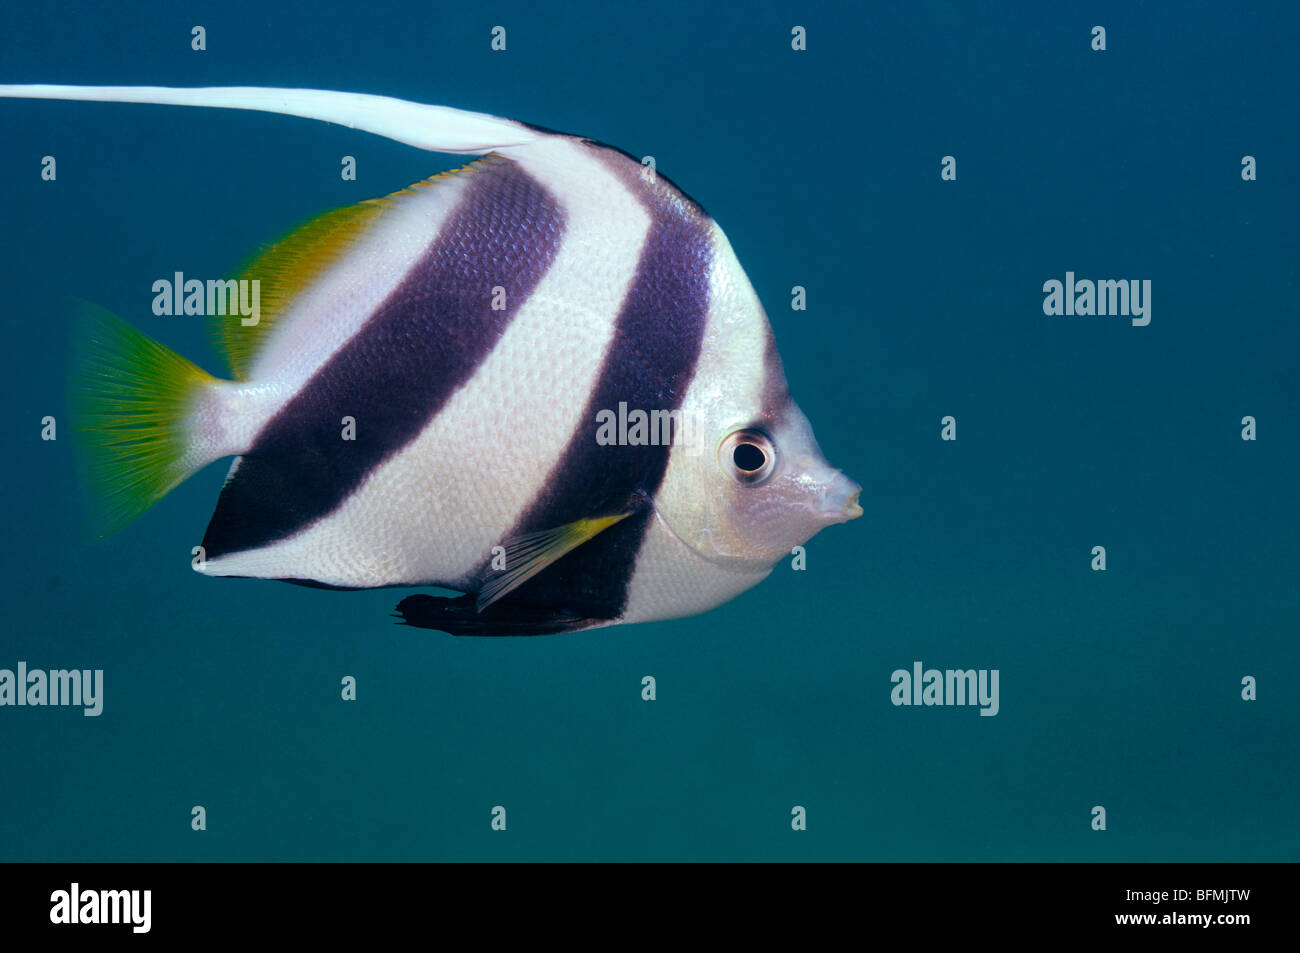 Schooling or Pennant bannerfish, Heniochus diphreutes. 'Red Sea' Stock Photo